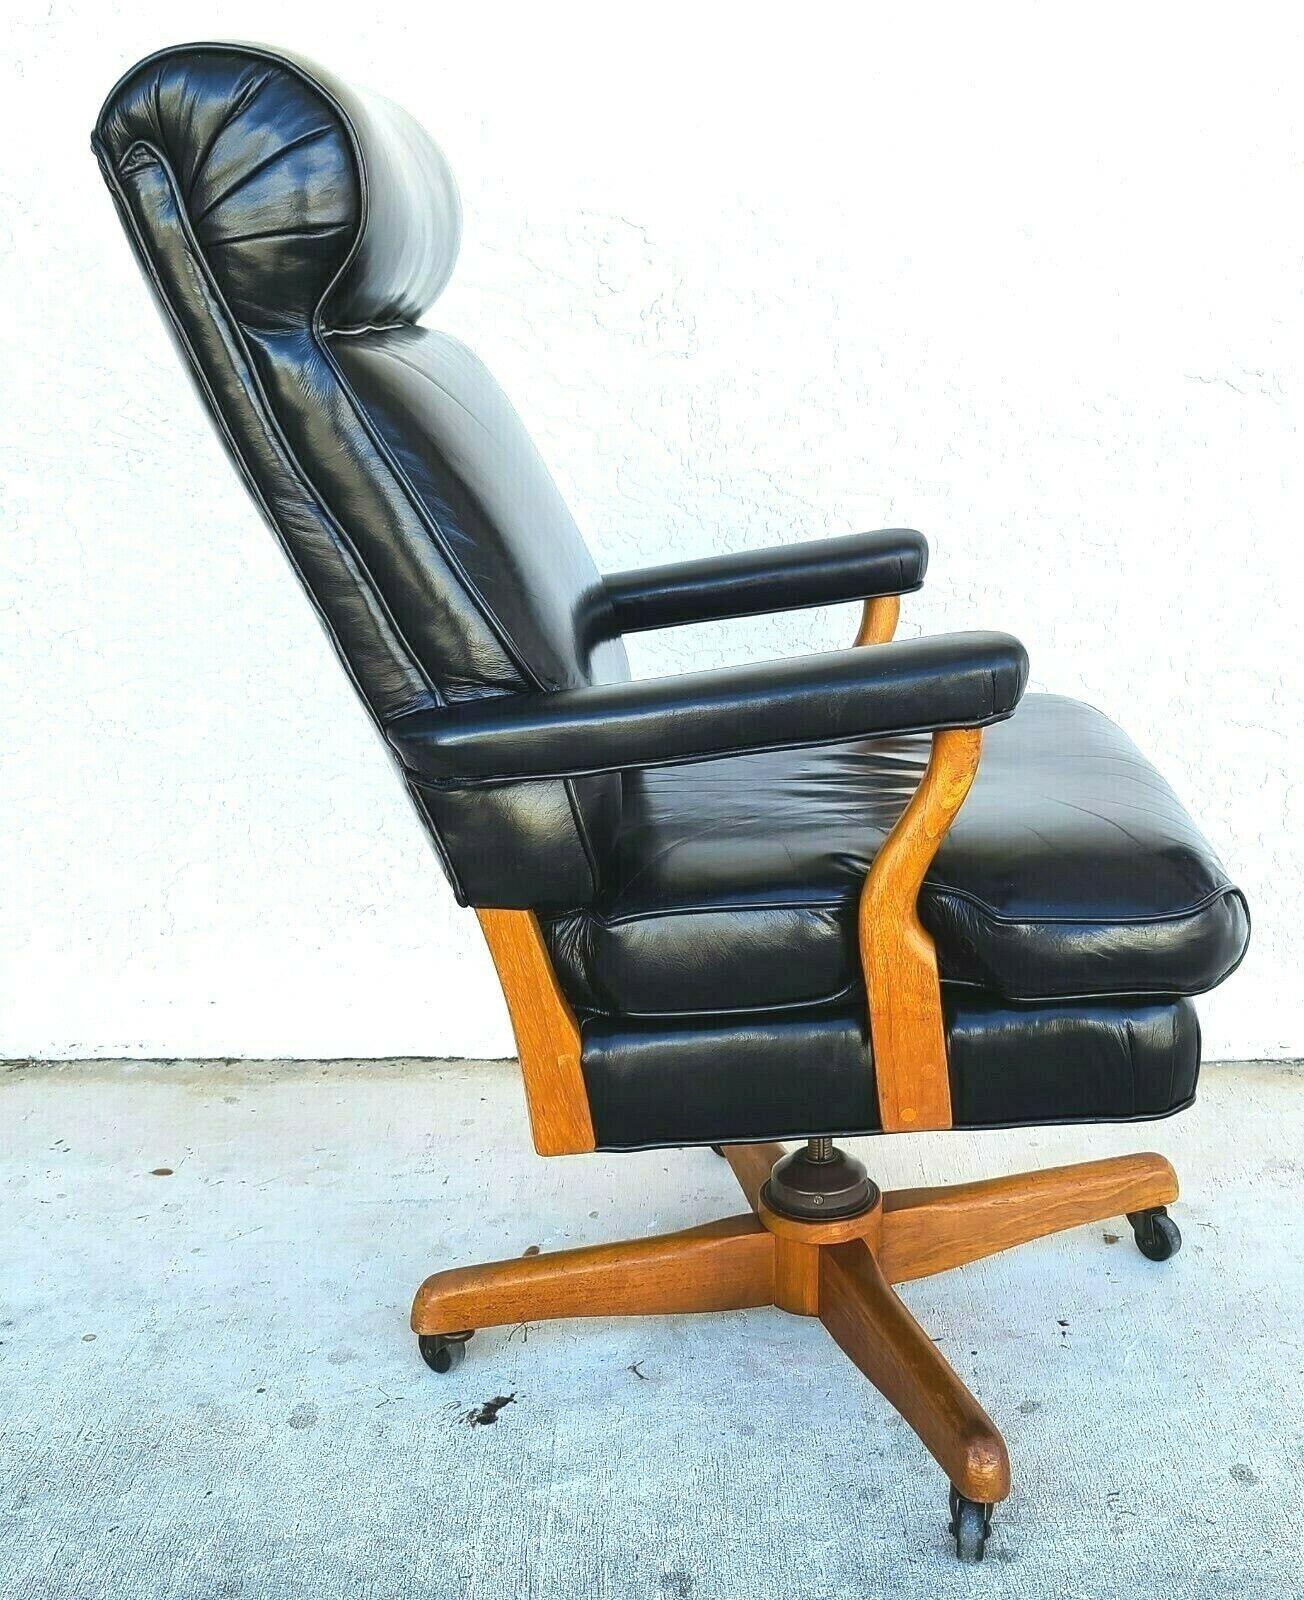 Offering One Of Our Recent Palm Beach Estate Fine Furniture Acquisitions Of A 
Mid Century JFK GUNLOCKE Style Leather Judiciary Executive Office Chair
With casters, Full Swivel, adjustable height, and adjustable tilt features

Approximate